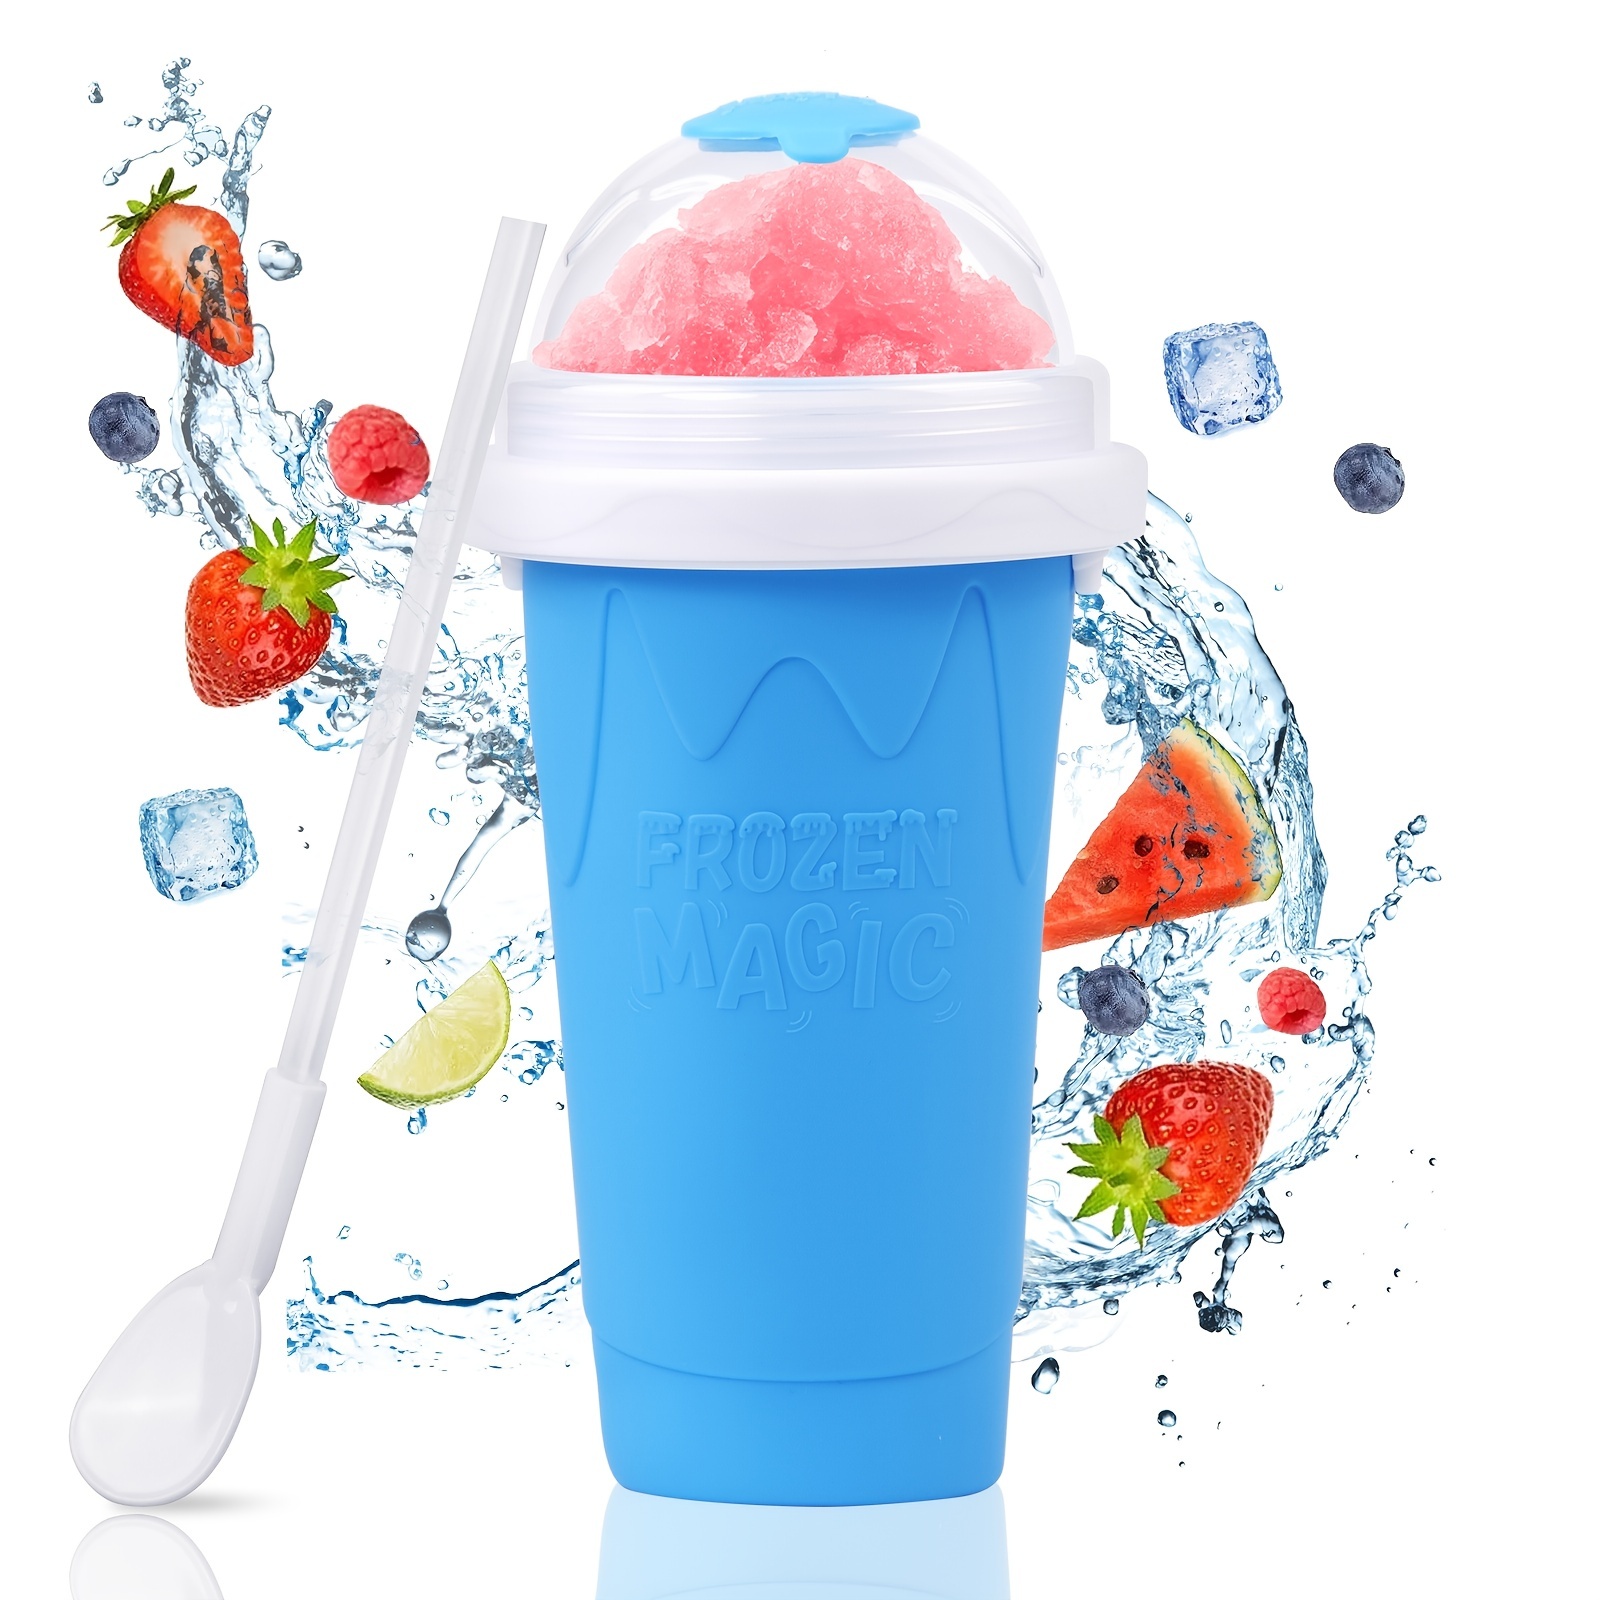 Slushy Maker Cup Frozen Magic Squeeze Cup Travel Portable Double Layer Silica Pinch Cup Summer Cooler Smoothie Cup Homemade Slushie Milkshake Maker